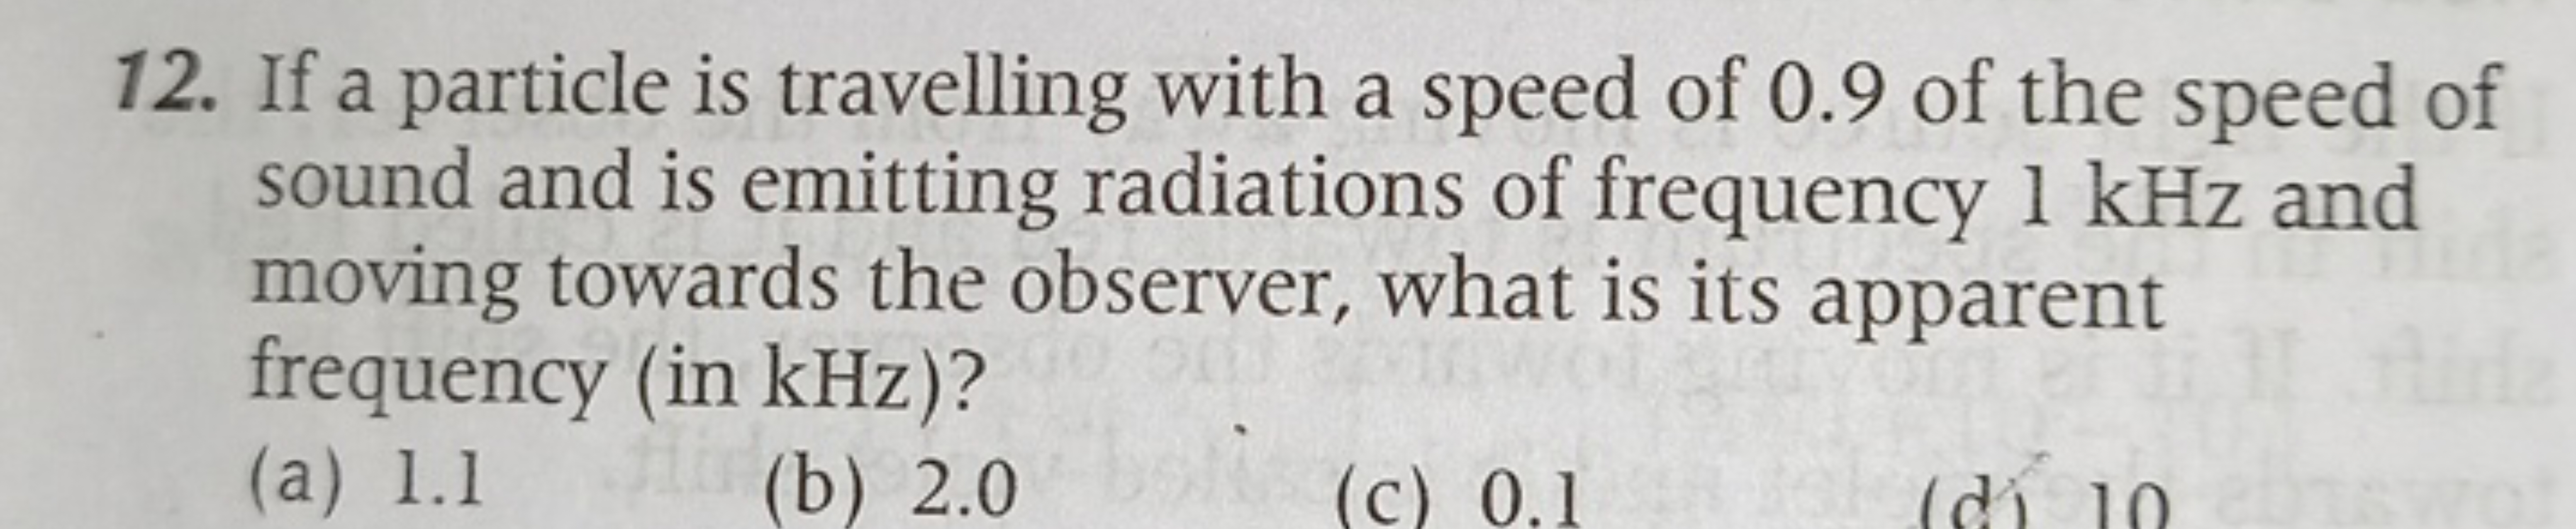 12. If a particle is travelling with a speed of 0.9 of the speed of so